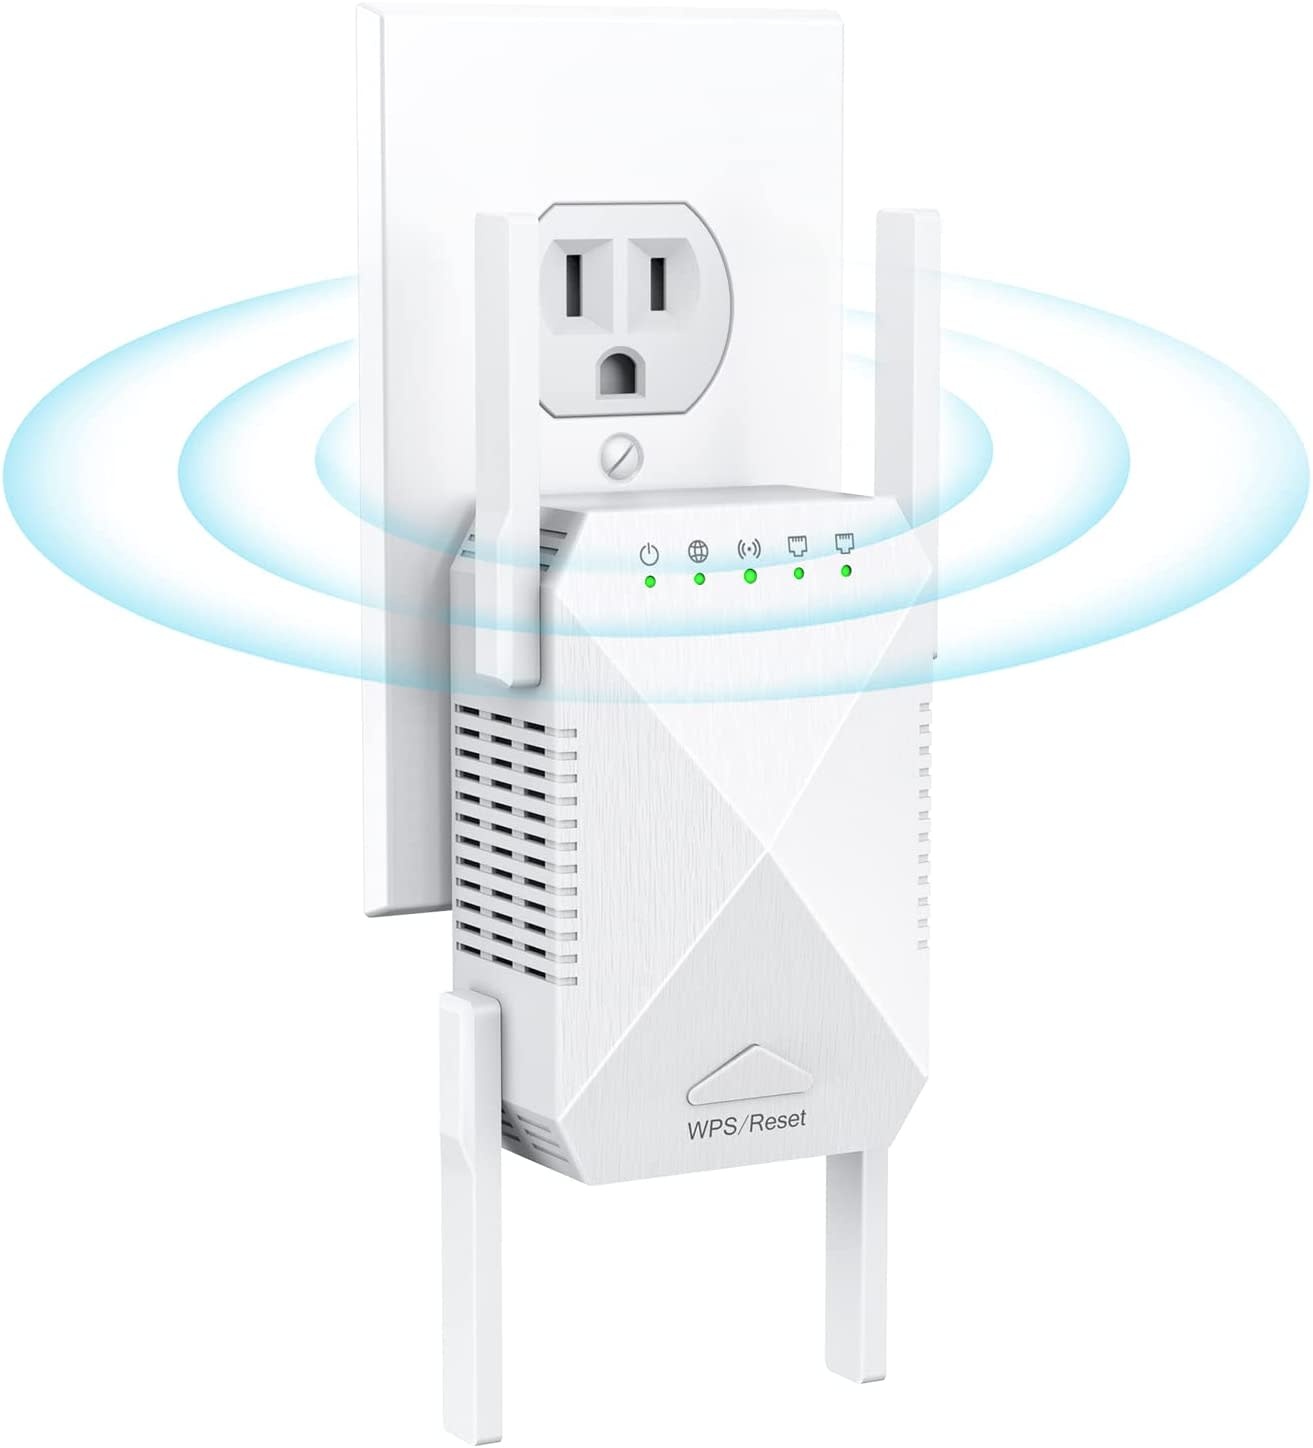 WIFI-EXT-10000SqFt - Edtiske - WiFi Extender, 2023 Fastest WiFi Booster  1200Mbps Dual Band (5GHz/2.4GHz) WiFi Extenders Signal Booster for Home,  Internet Booster WiFi Repeater Covers up to 10000sq. ft and 45 Devices 